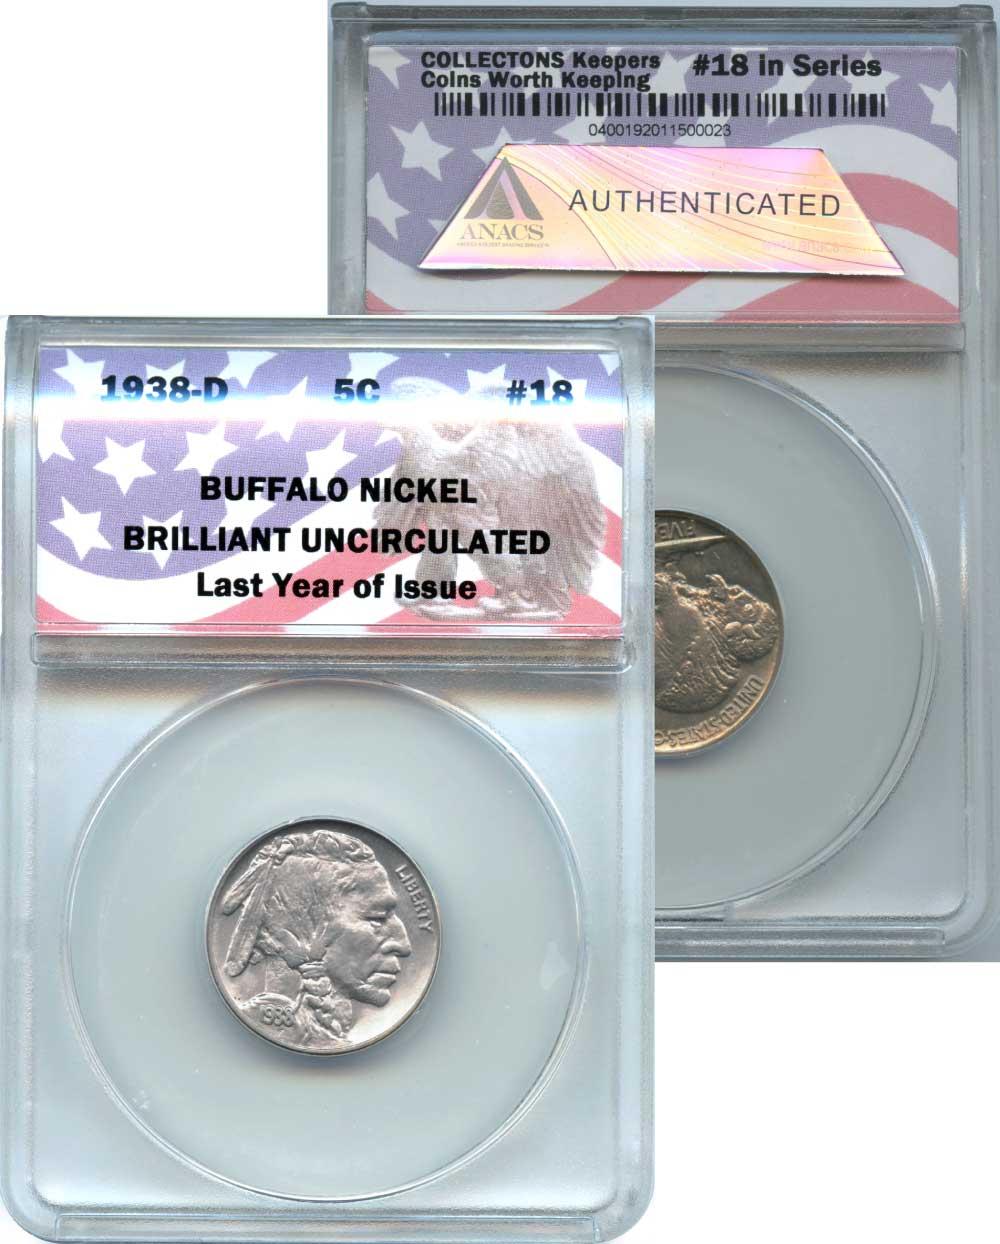 CollecTons Keepers #18: 1938-D Buffalo Nickel Certified in Exclusive ANACS Brilliant Uncirculated Holder